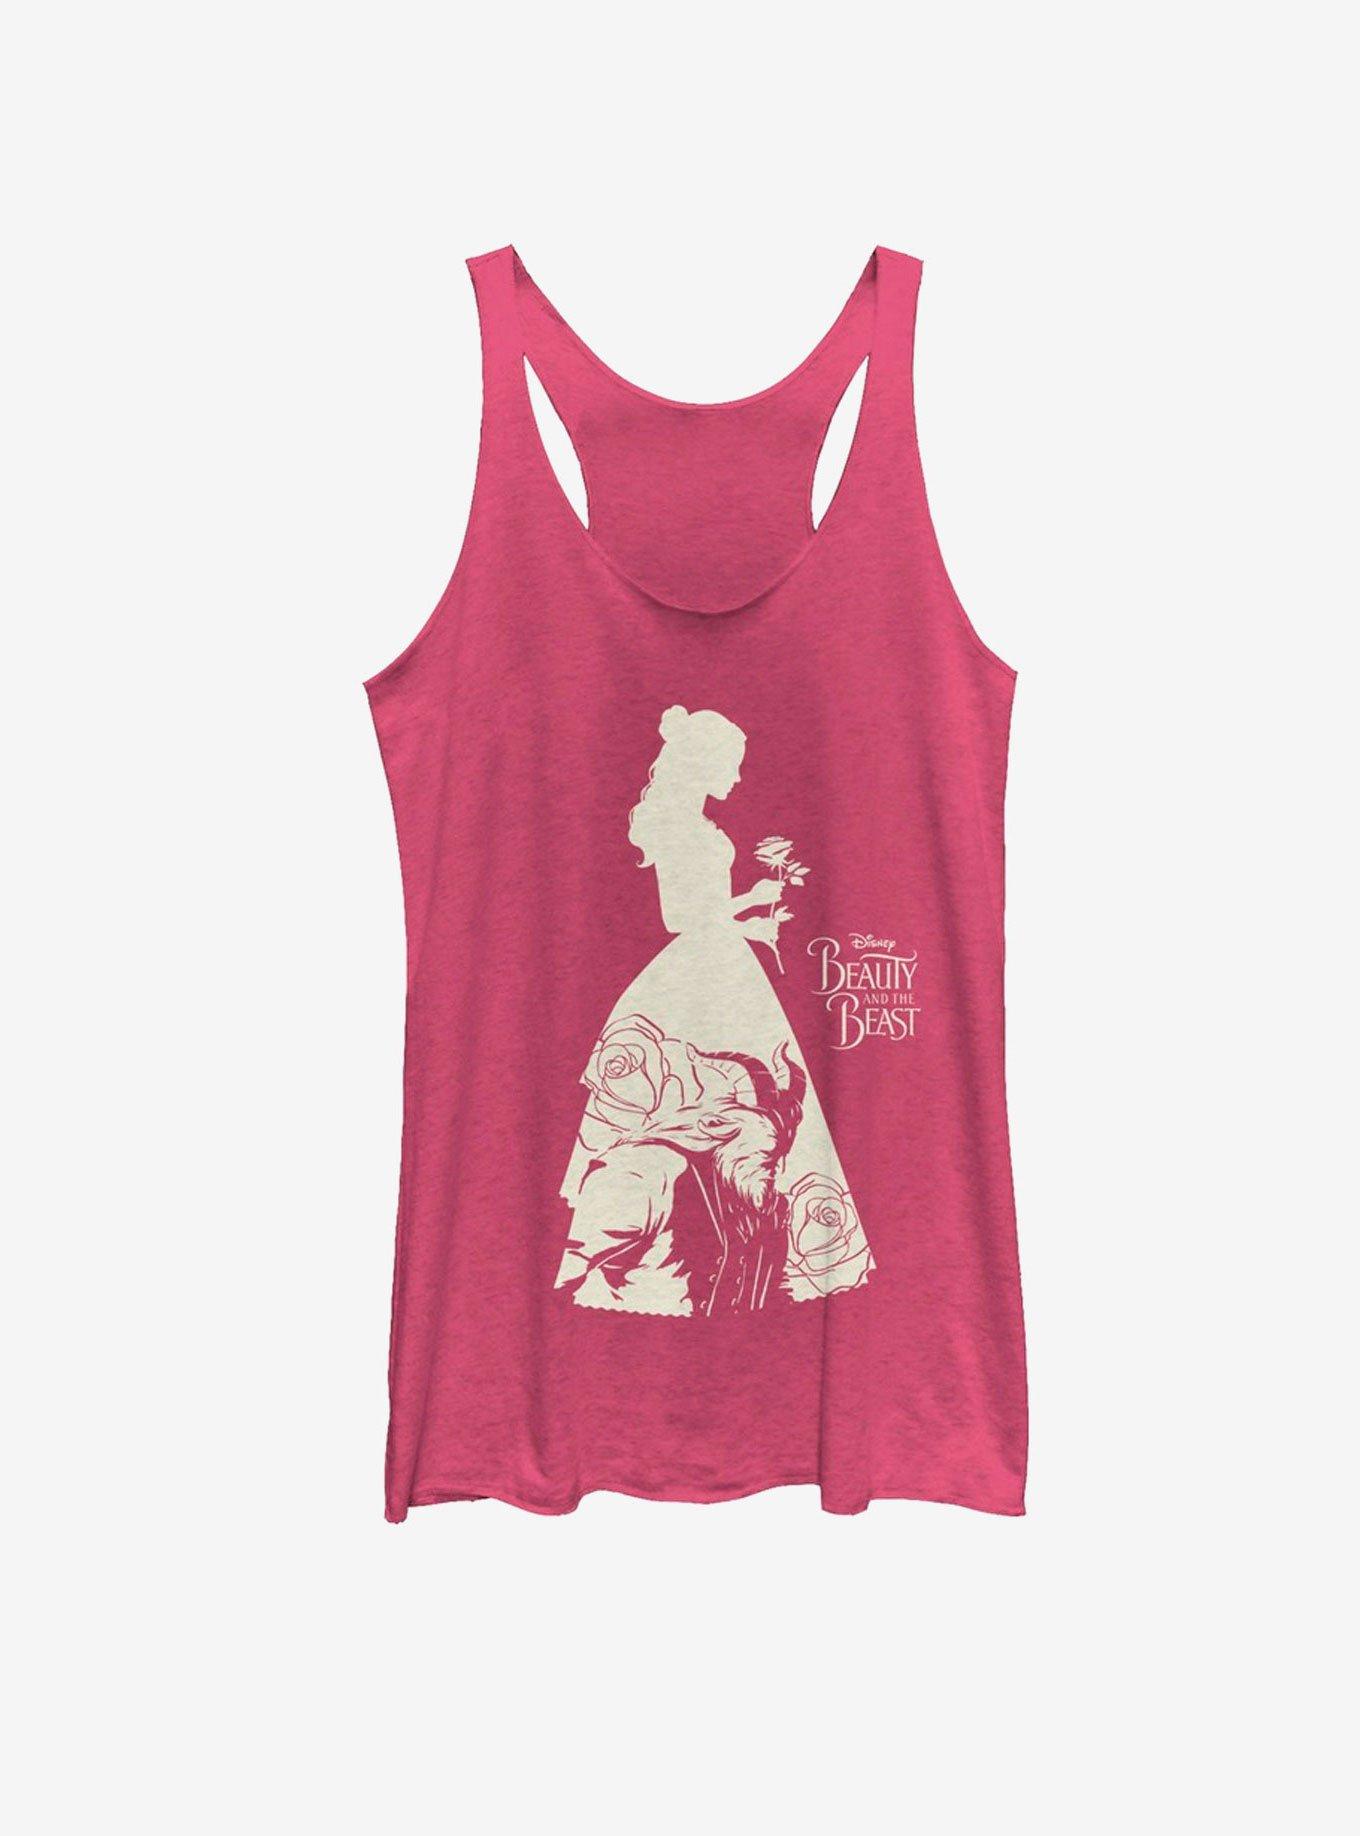 Disney Beauty And Beast Dress Silhouette Womens Tank, PINK HTR, hi-res